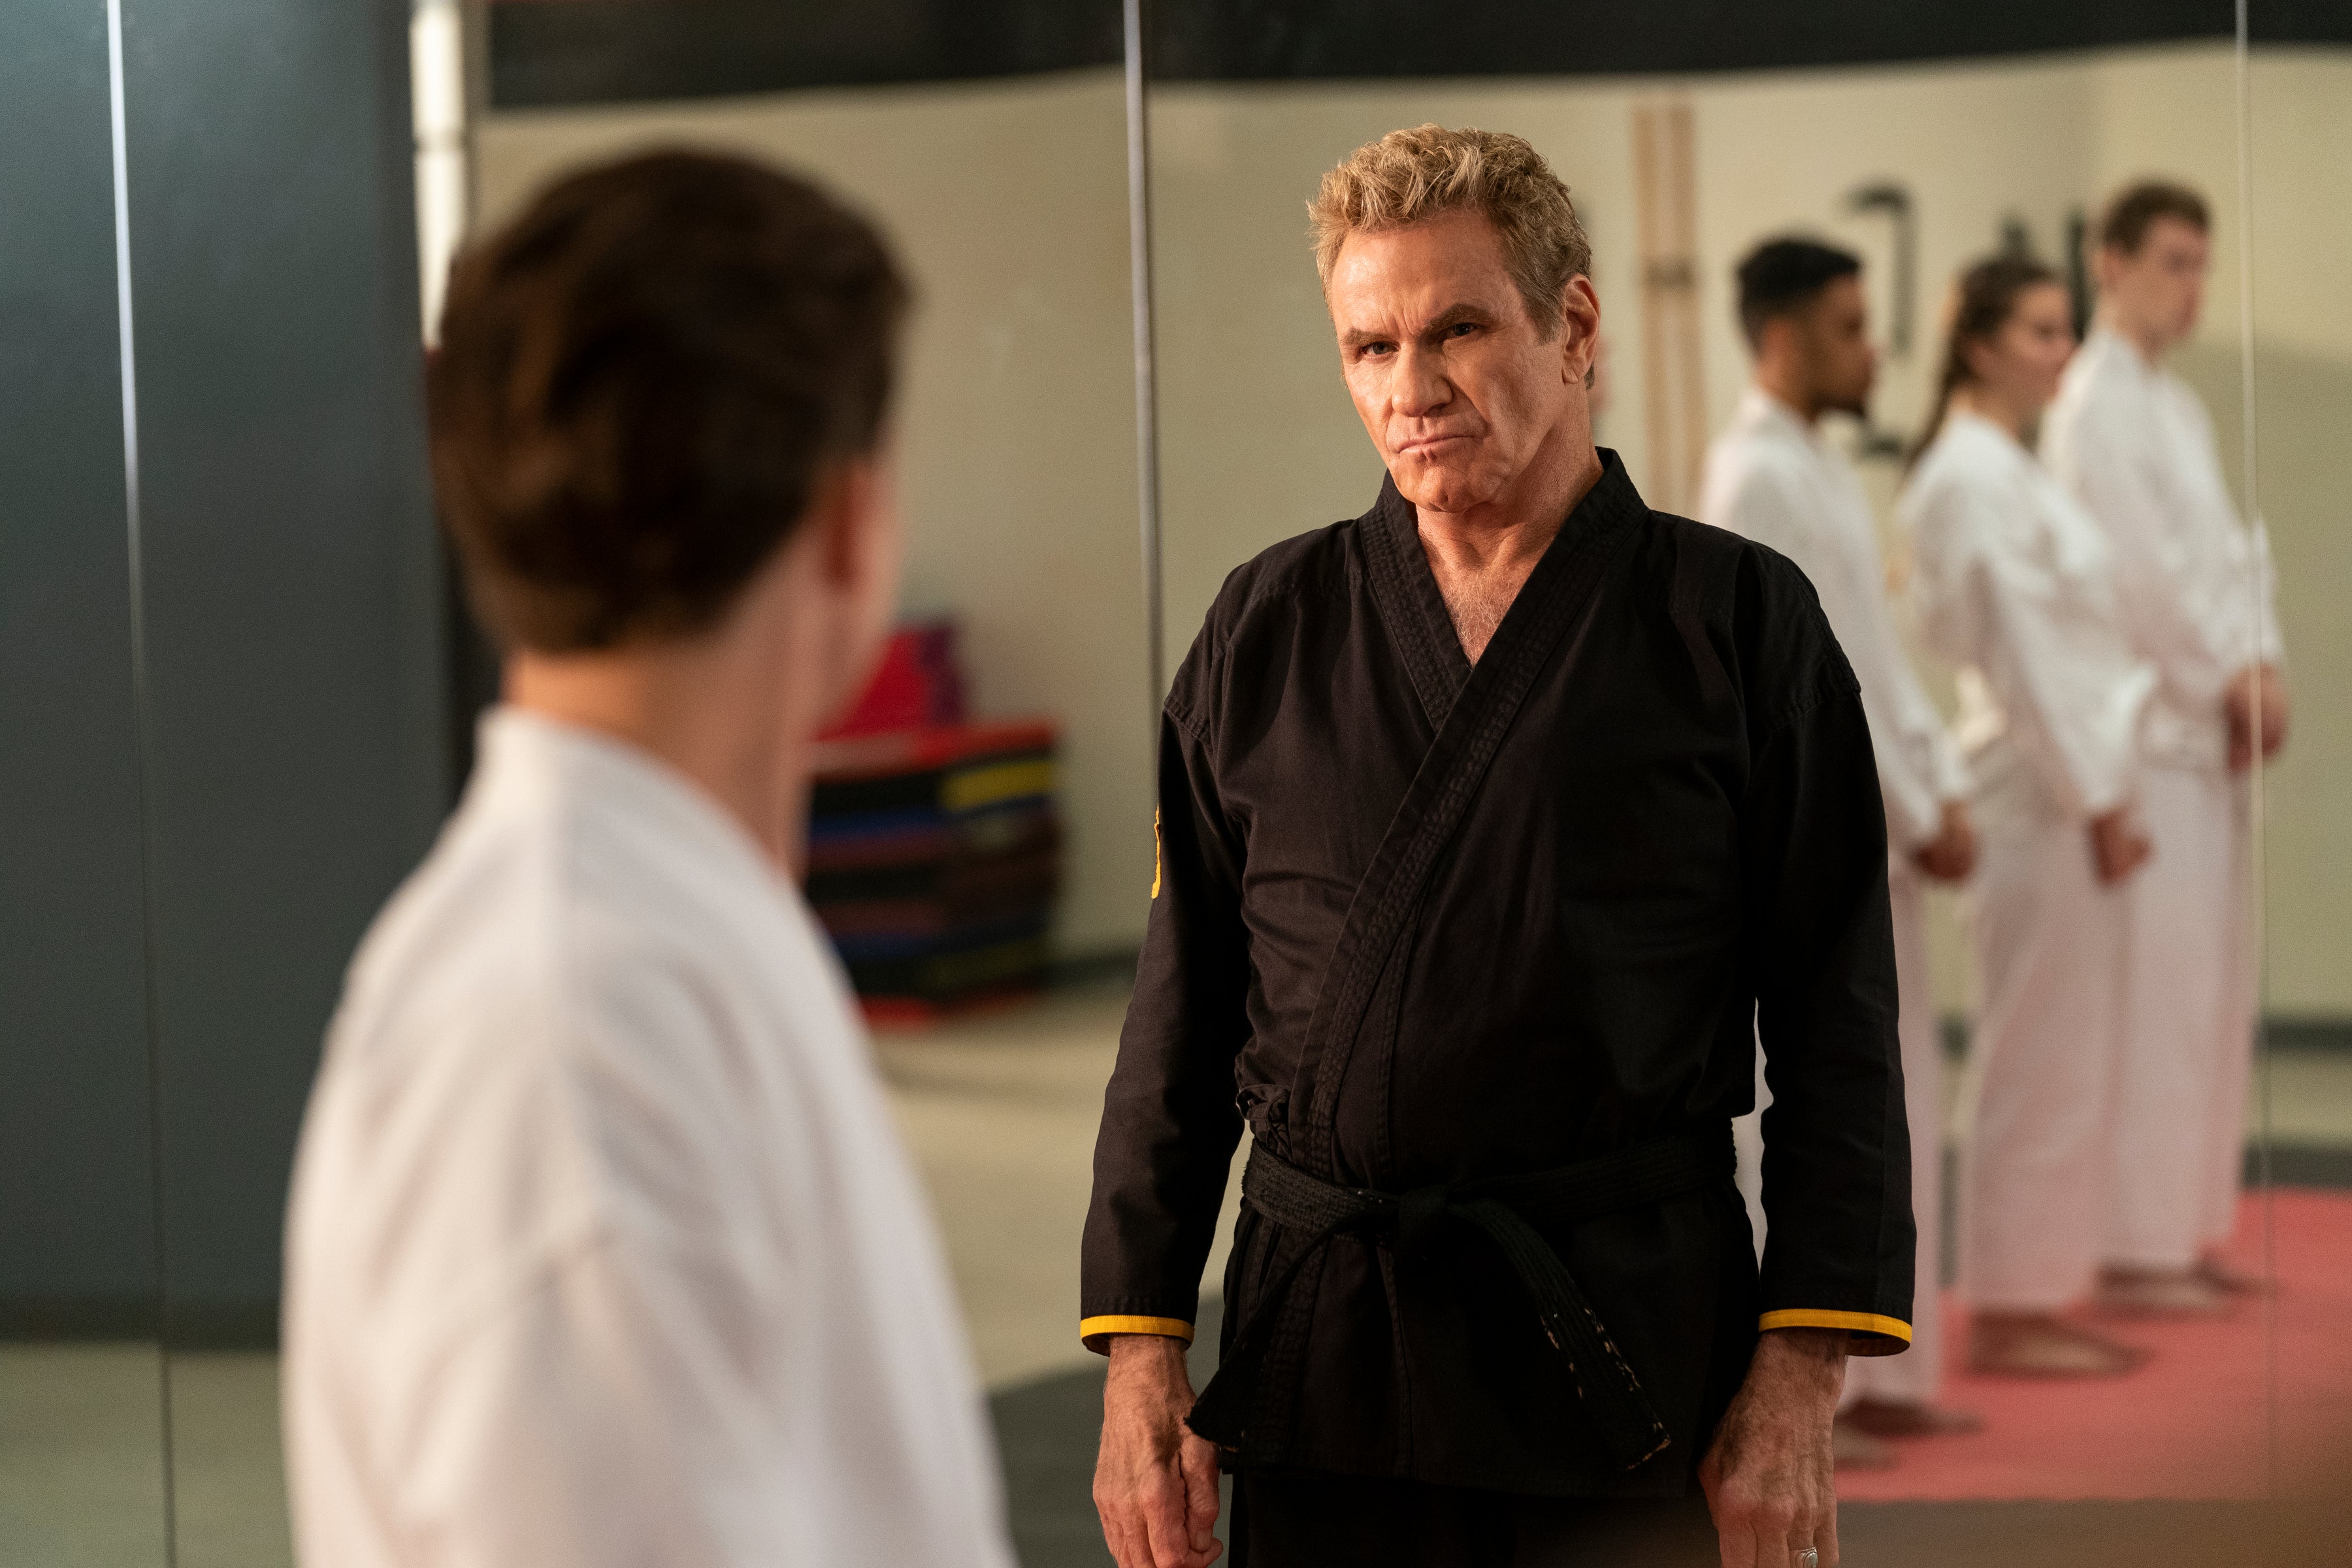 Cobra Kai season 4 review: Winning combo of silly and earnest